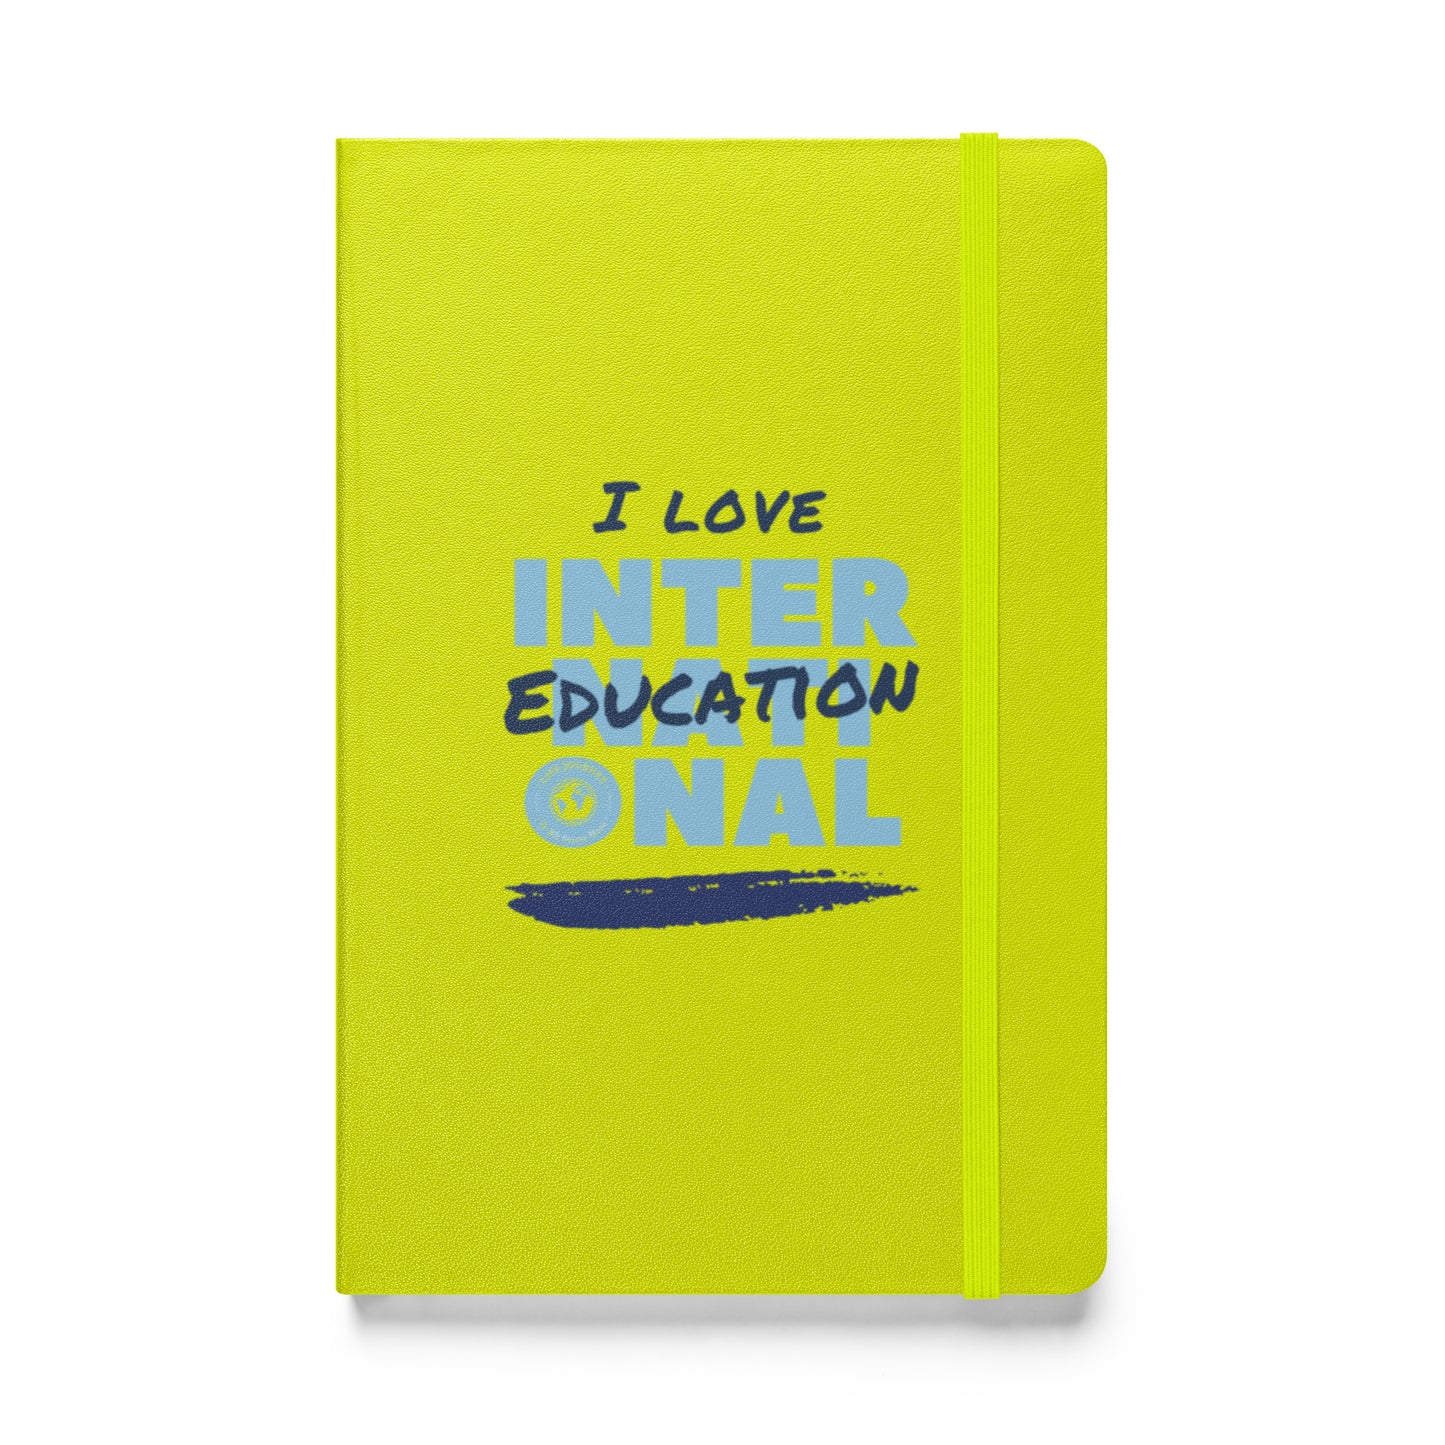 Hardcover bound notebook I Love Education